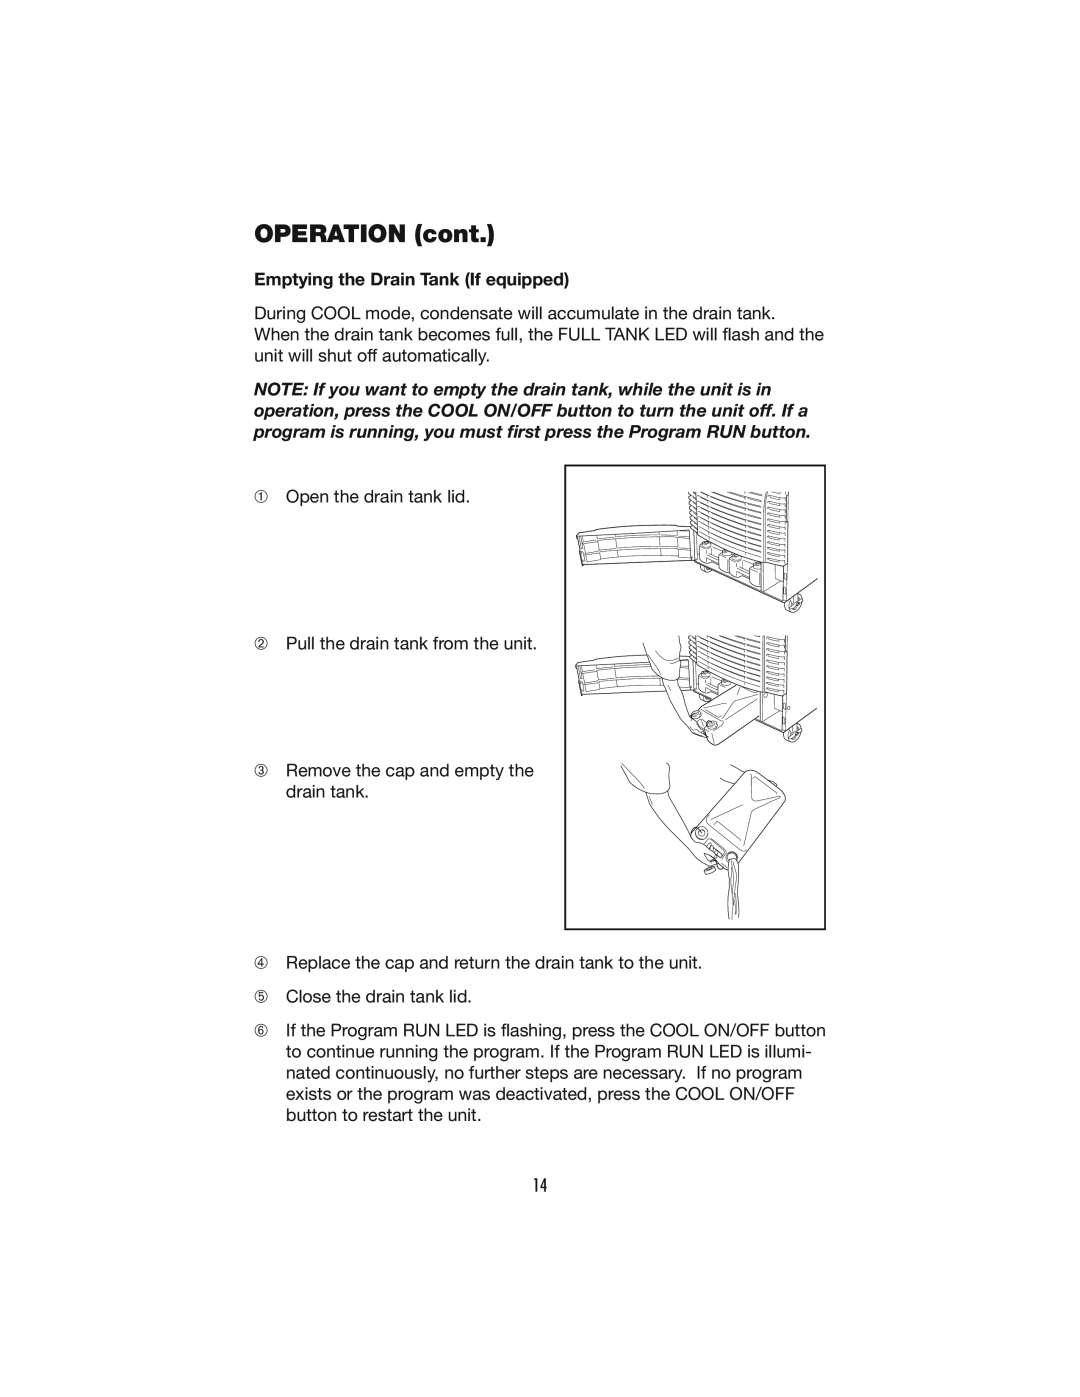 Denso PRO 60 operation manual Emptying the Drain Tank If equipped, OPERATION cont 